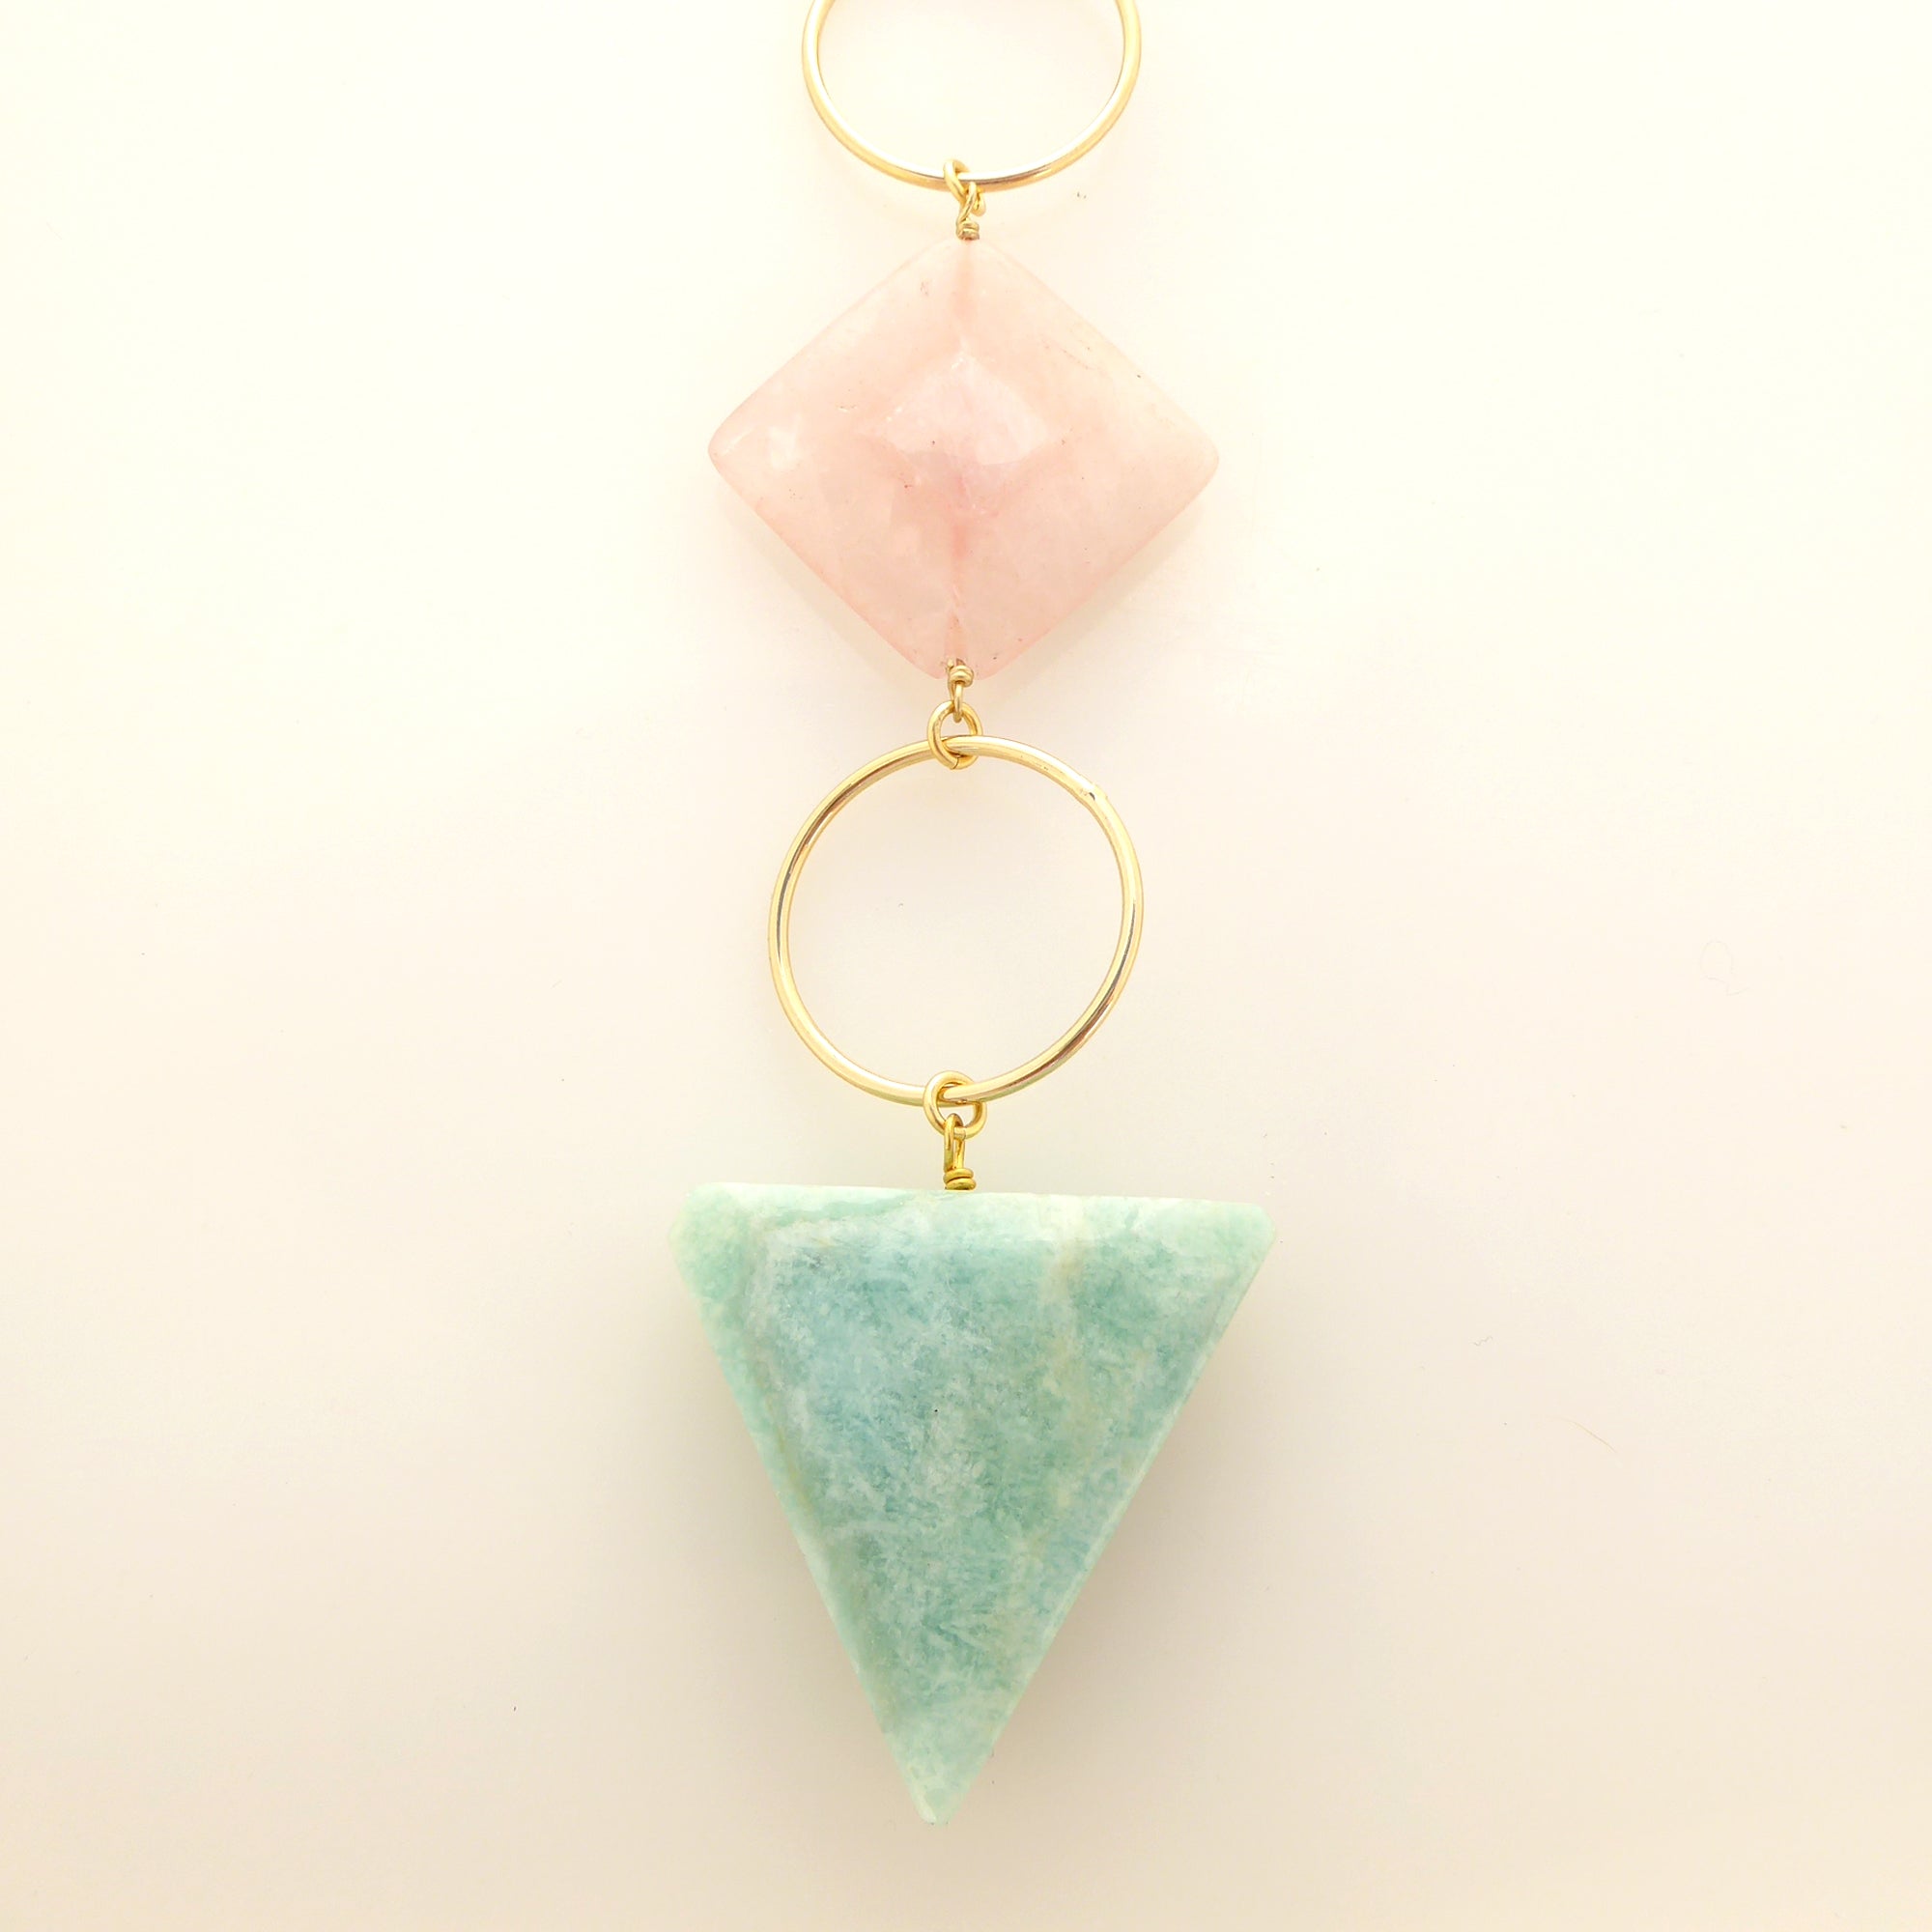 Gioia amazonite and rose quartz necklace by Jenny Dayco 4